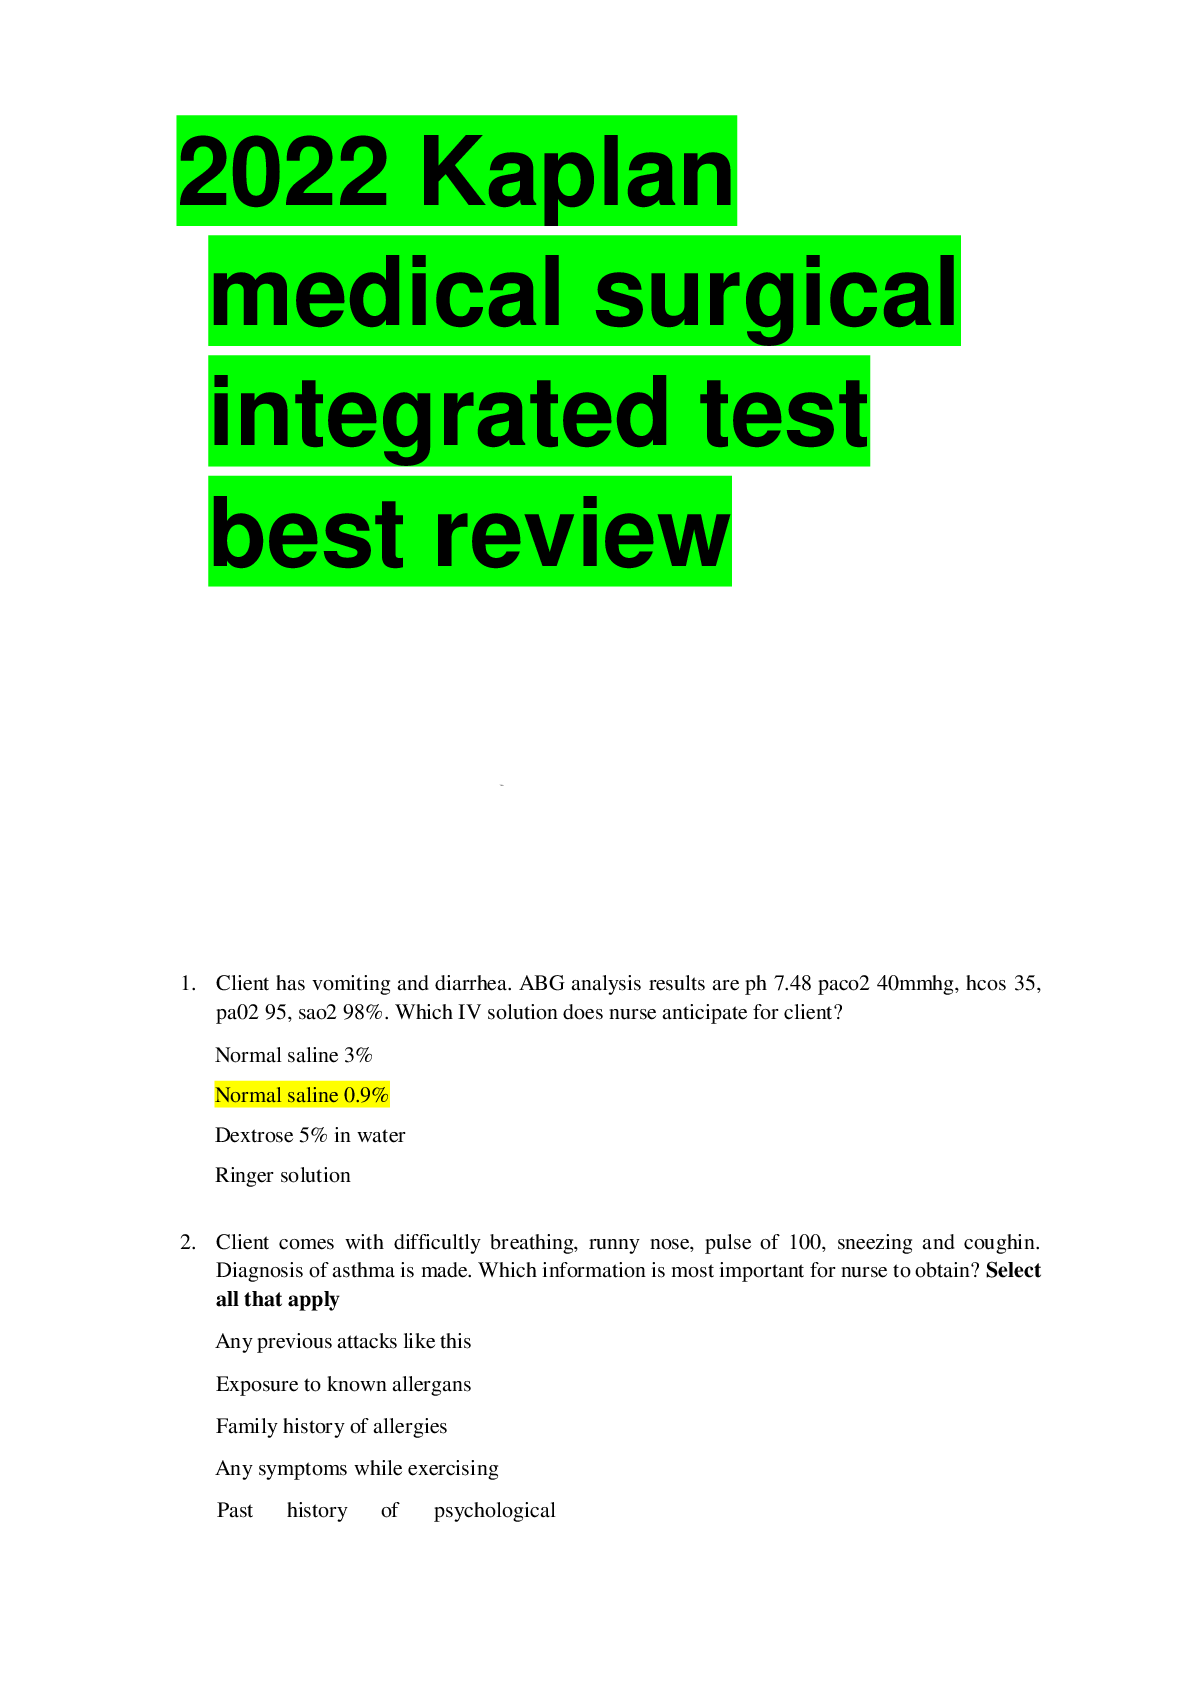 2022 Kaplan medical surgical integrated test best review Browsegrades